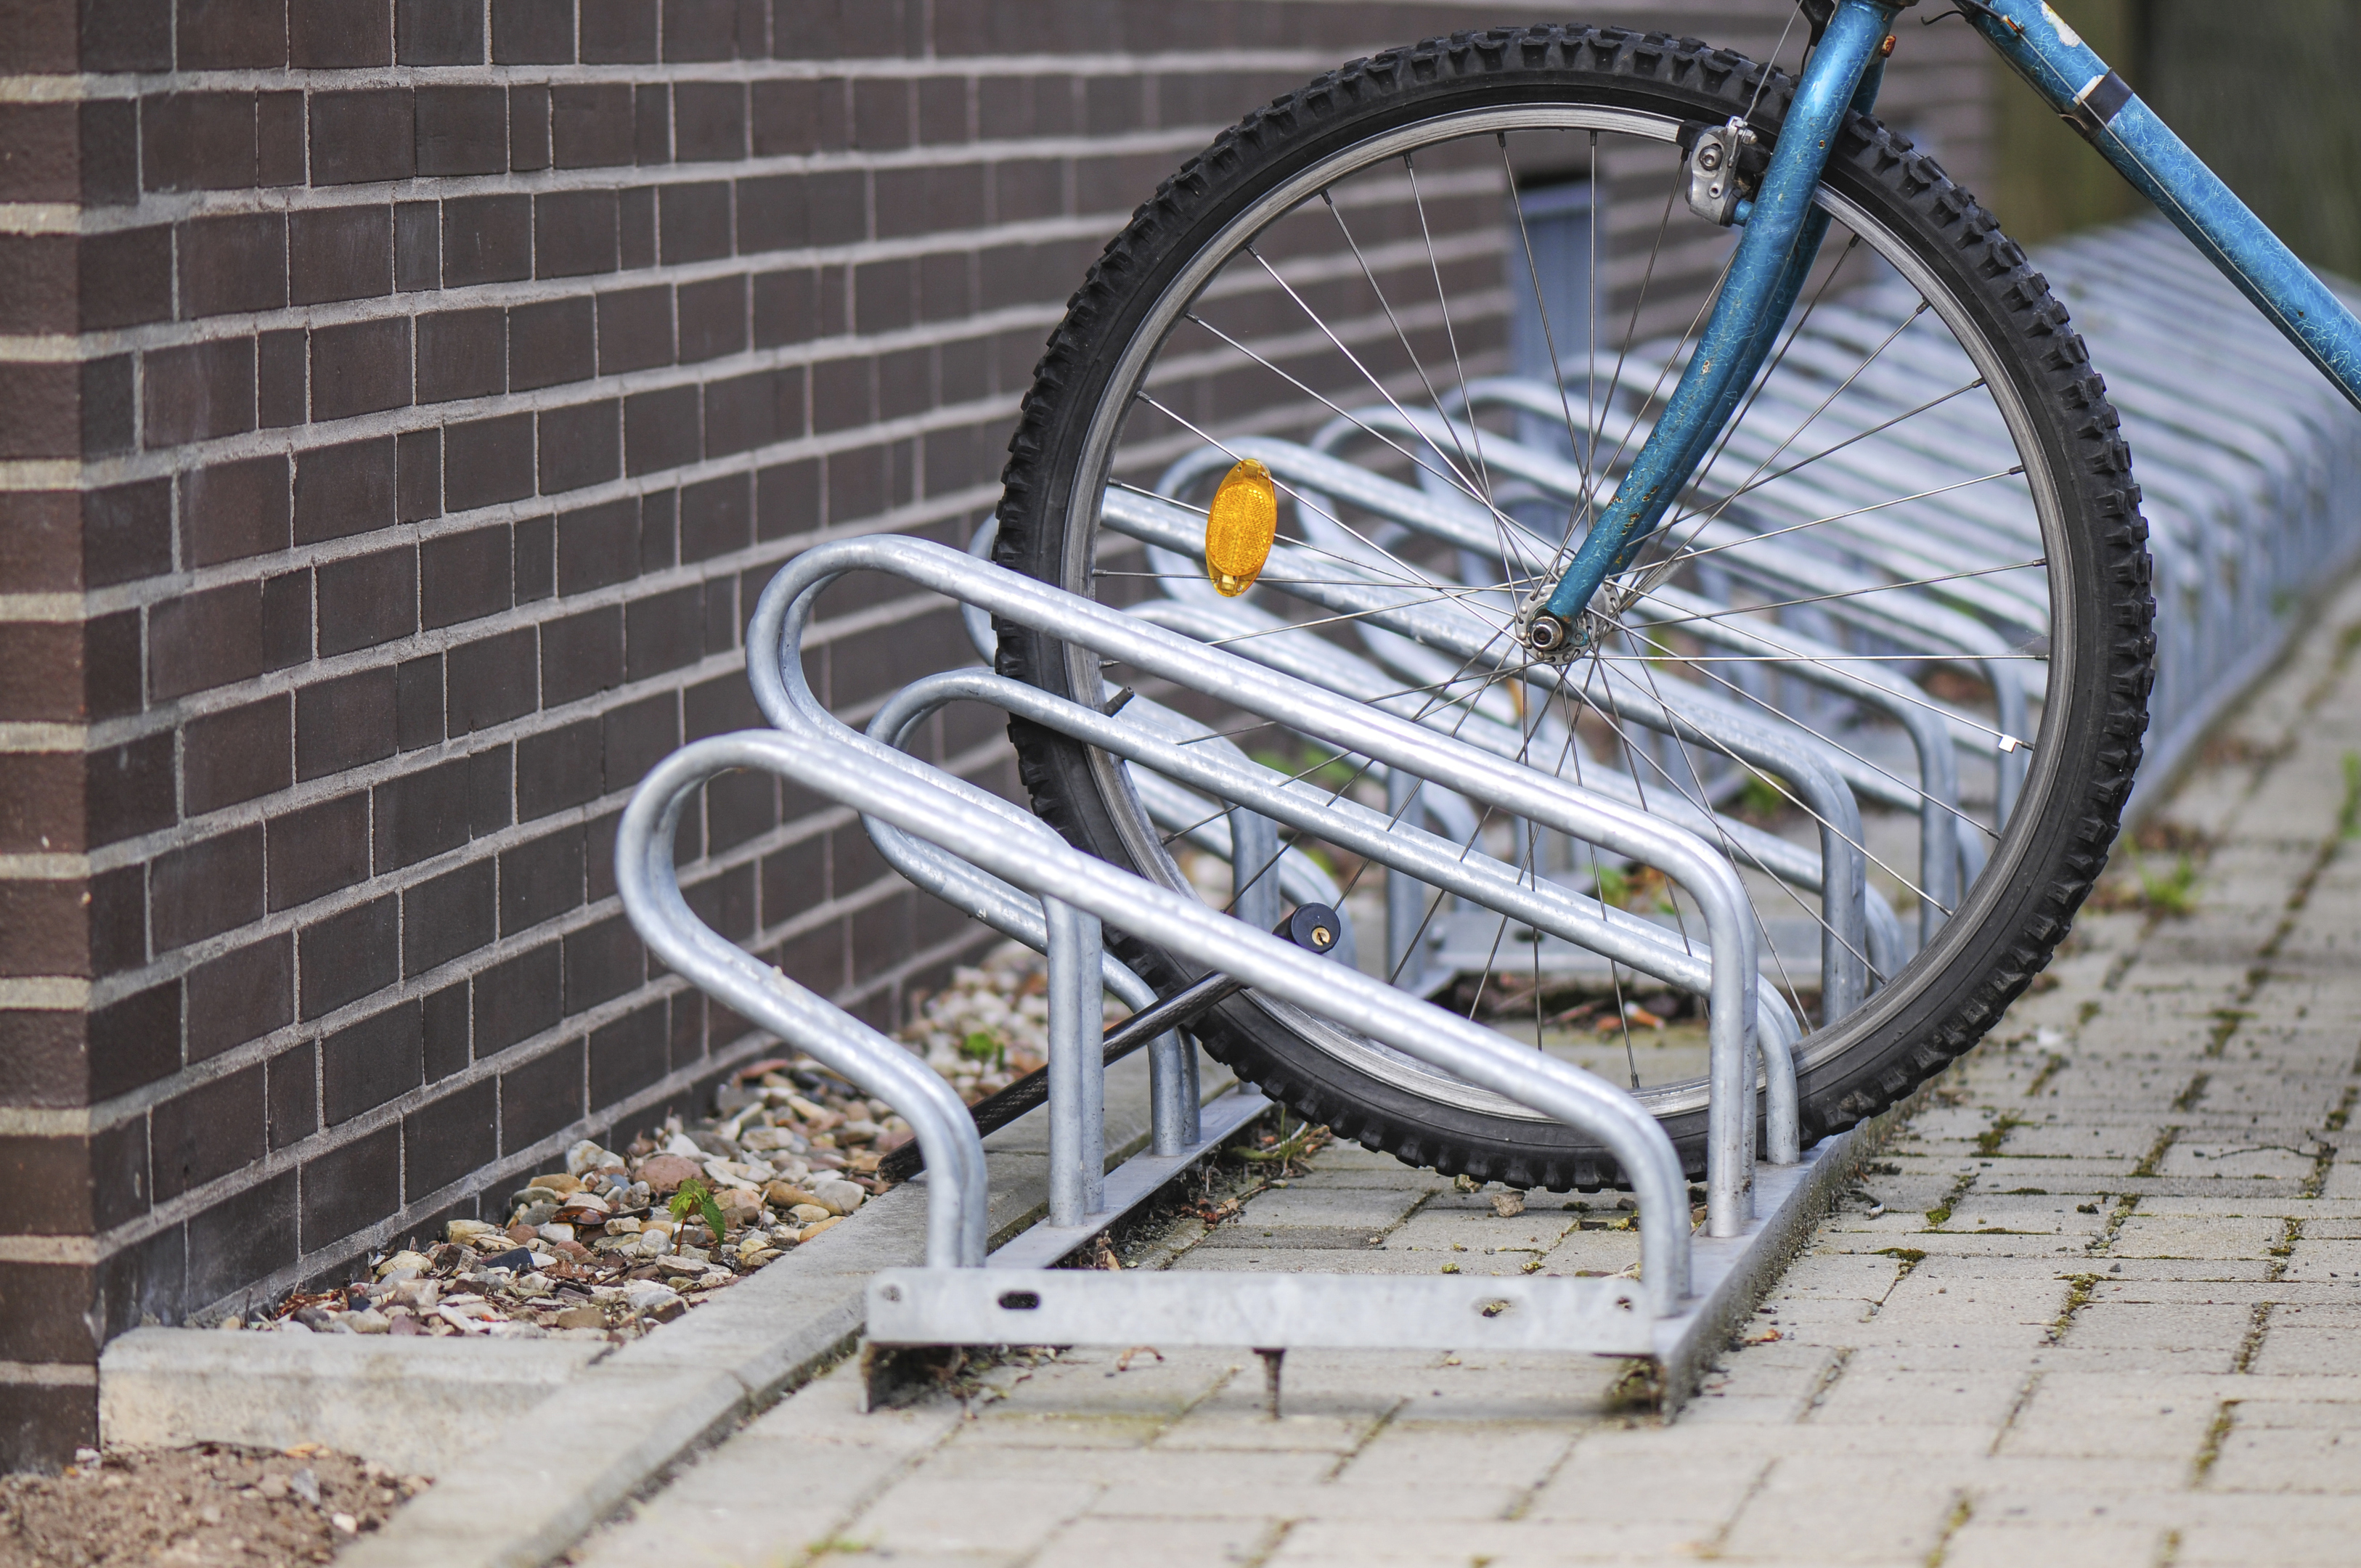 Bike thefts were most likely to be detected in Fife (Getty Images/iStock)